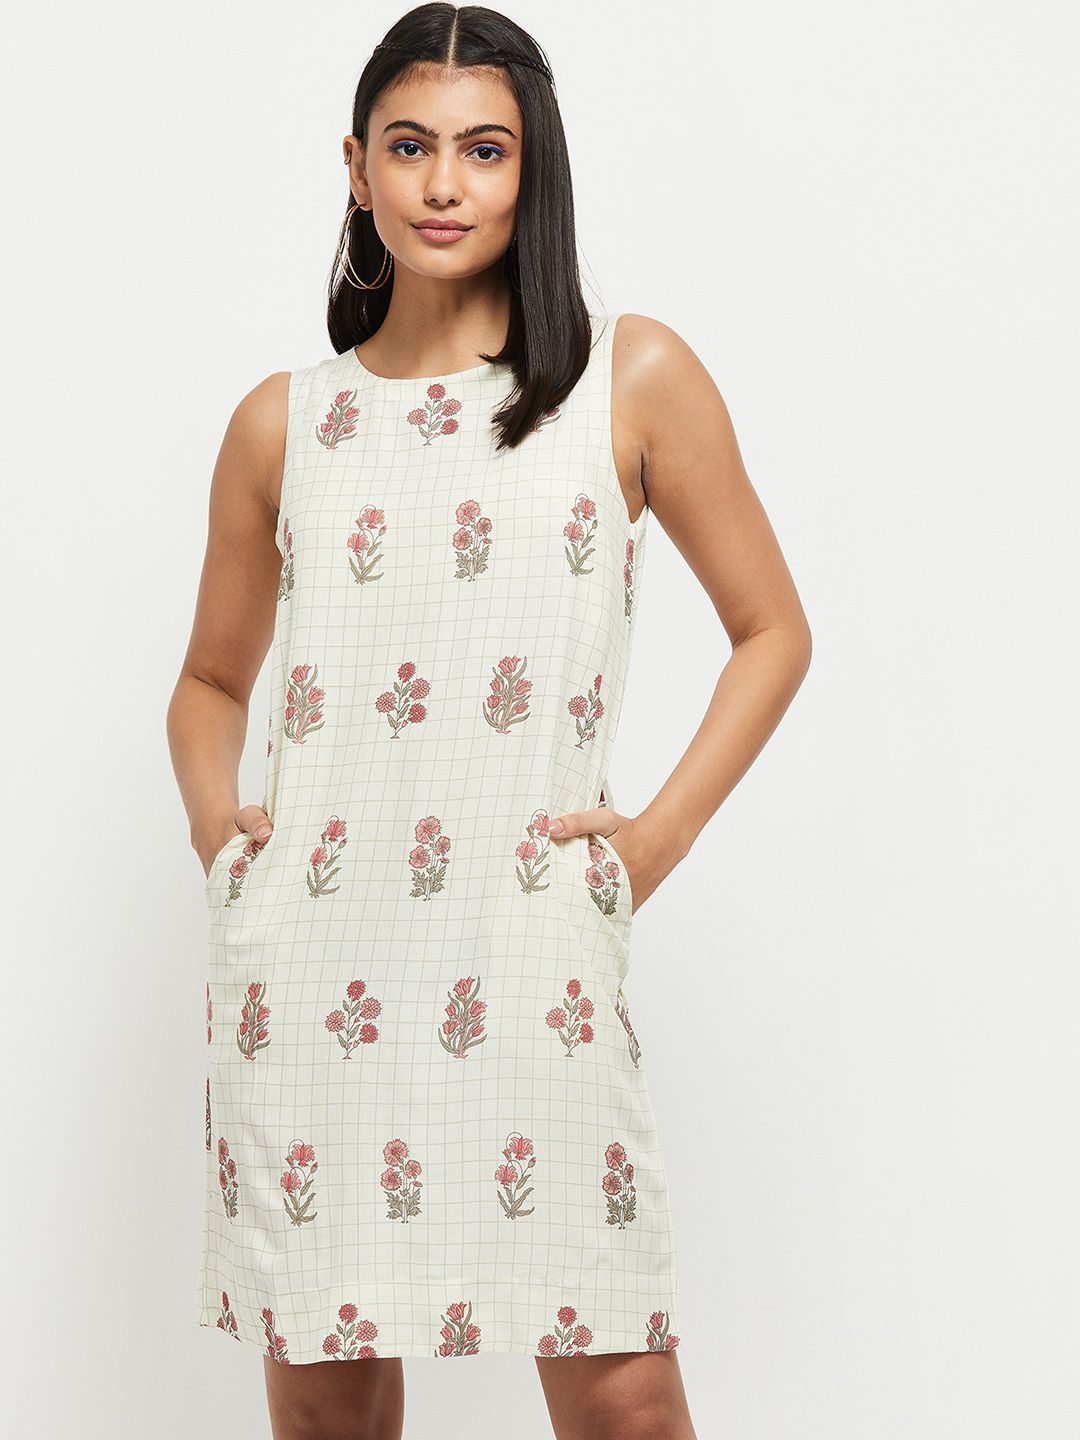 max Women Off White Floral A-Line Dress Price in India